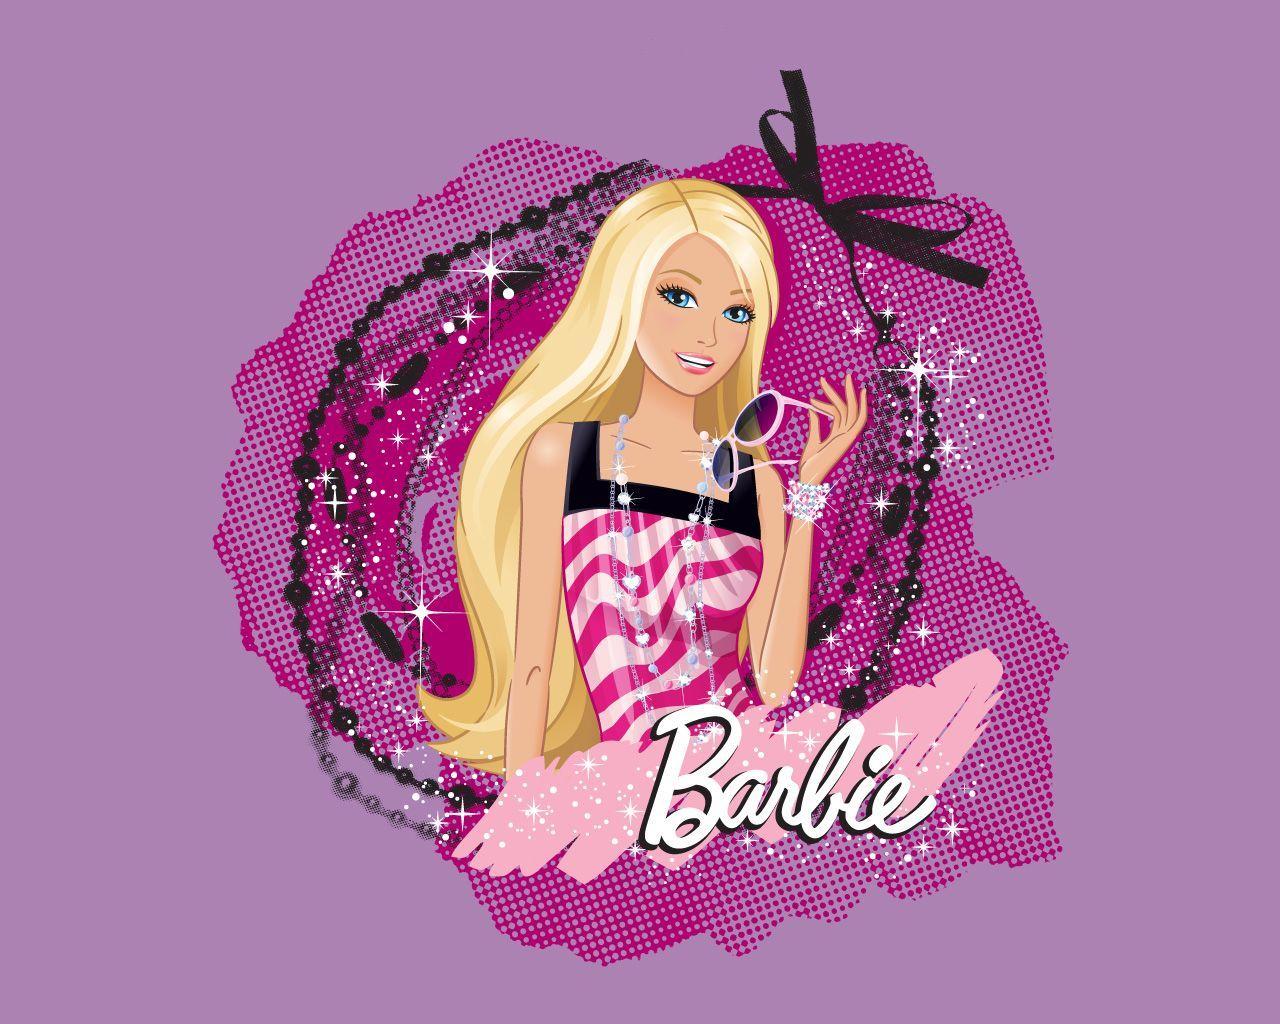 It's A Superstar And Girls Favorite Doll. Description From Designore.com. I Searched For This On Bing.com Image. Barbie Cartoon, Barbie Stories, Barbie Drawing